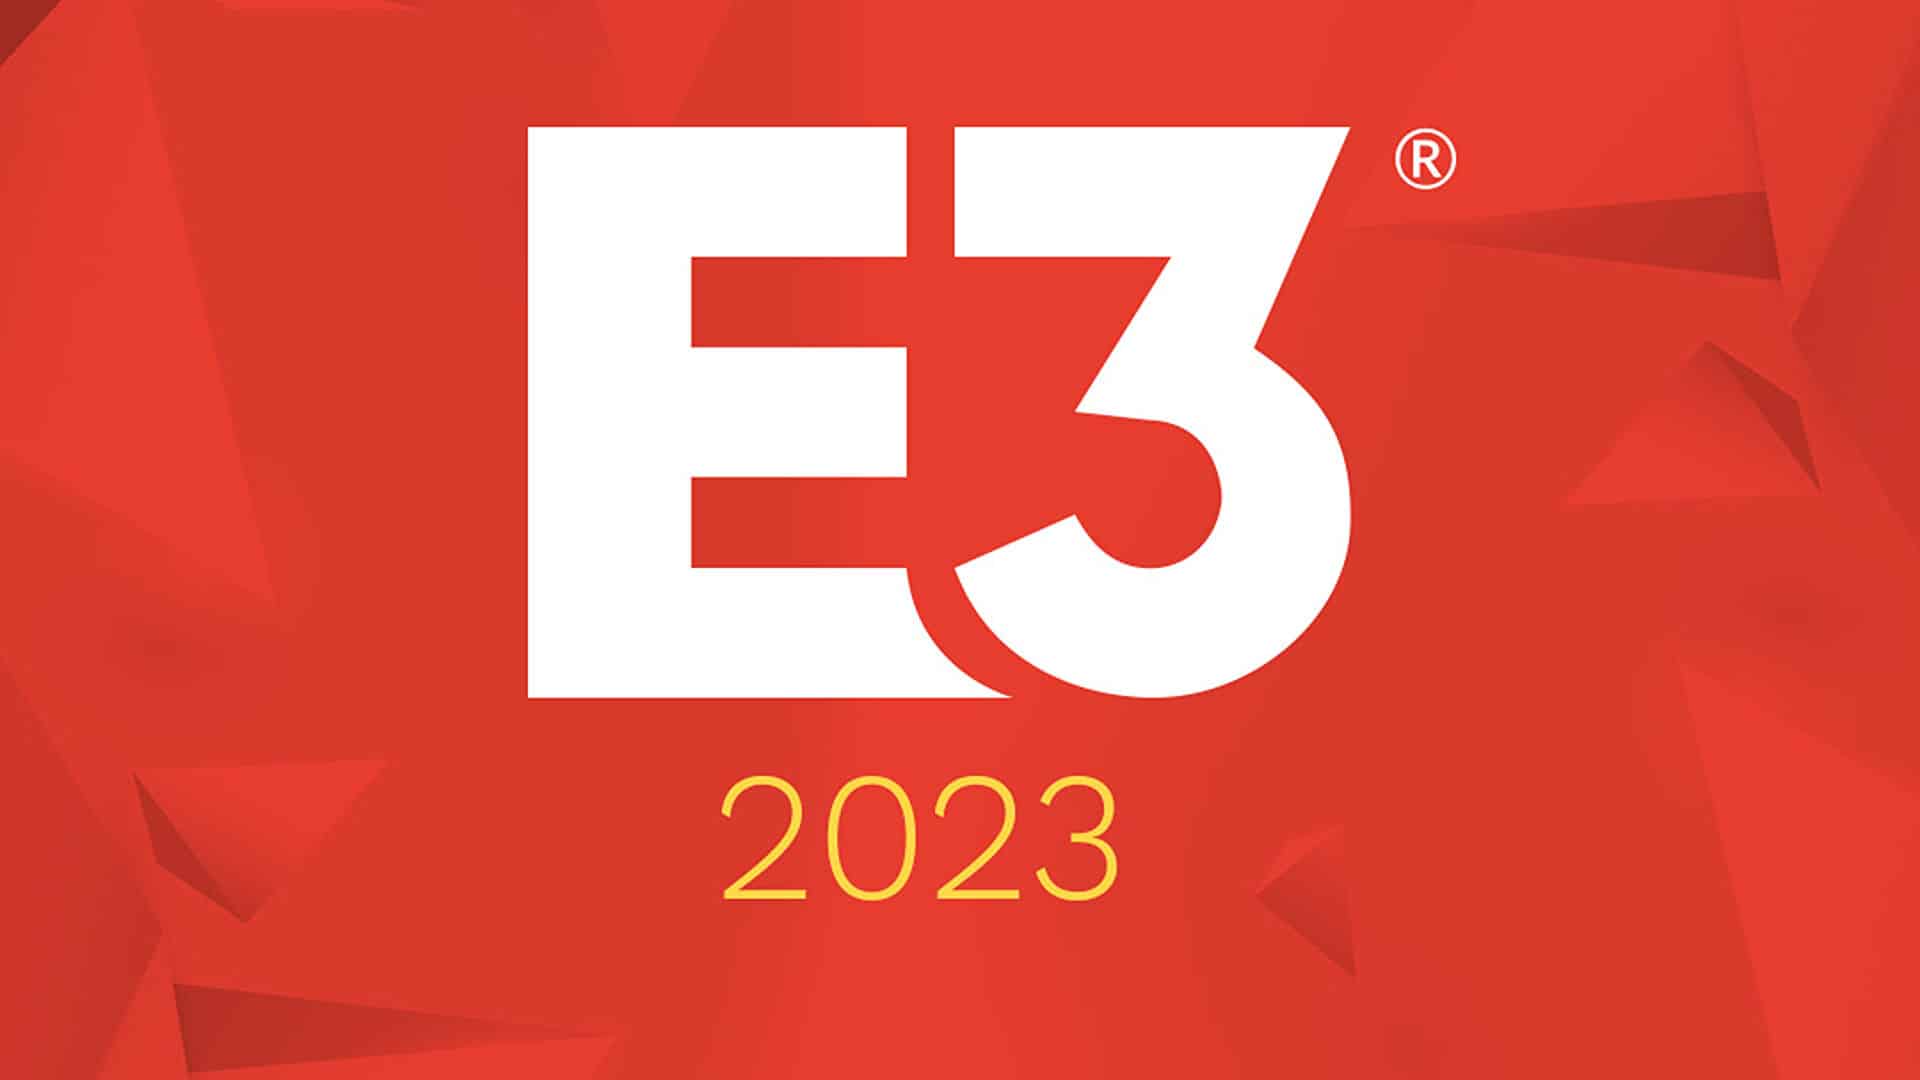 E3 is back for 2023, and our corporate dad ReedPop is producing it